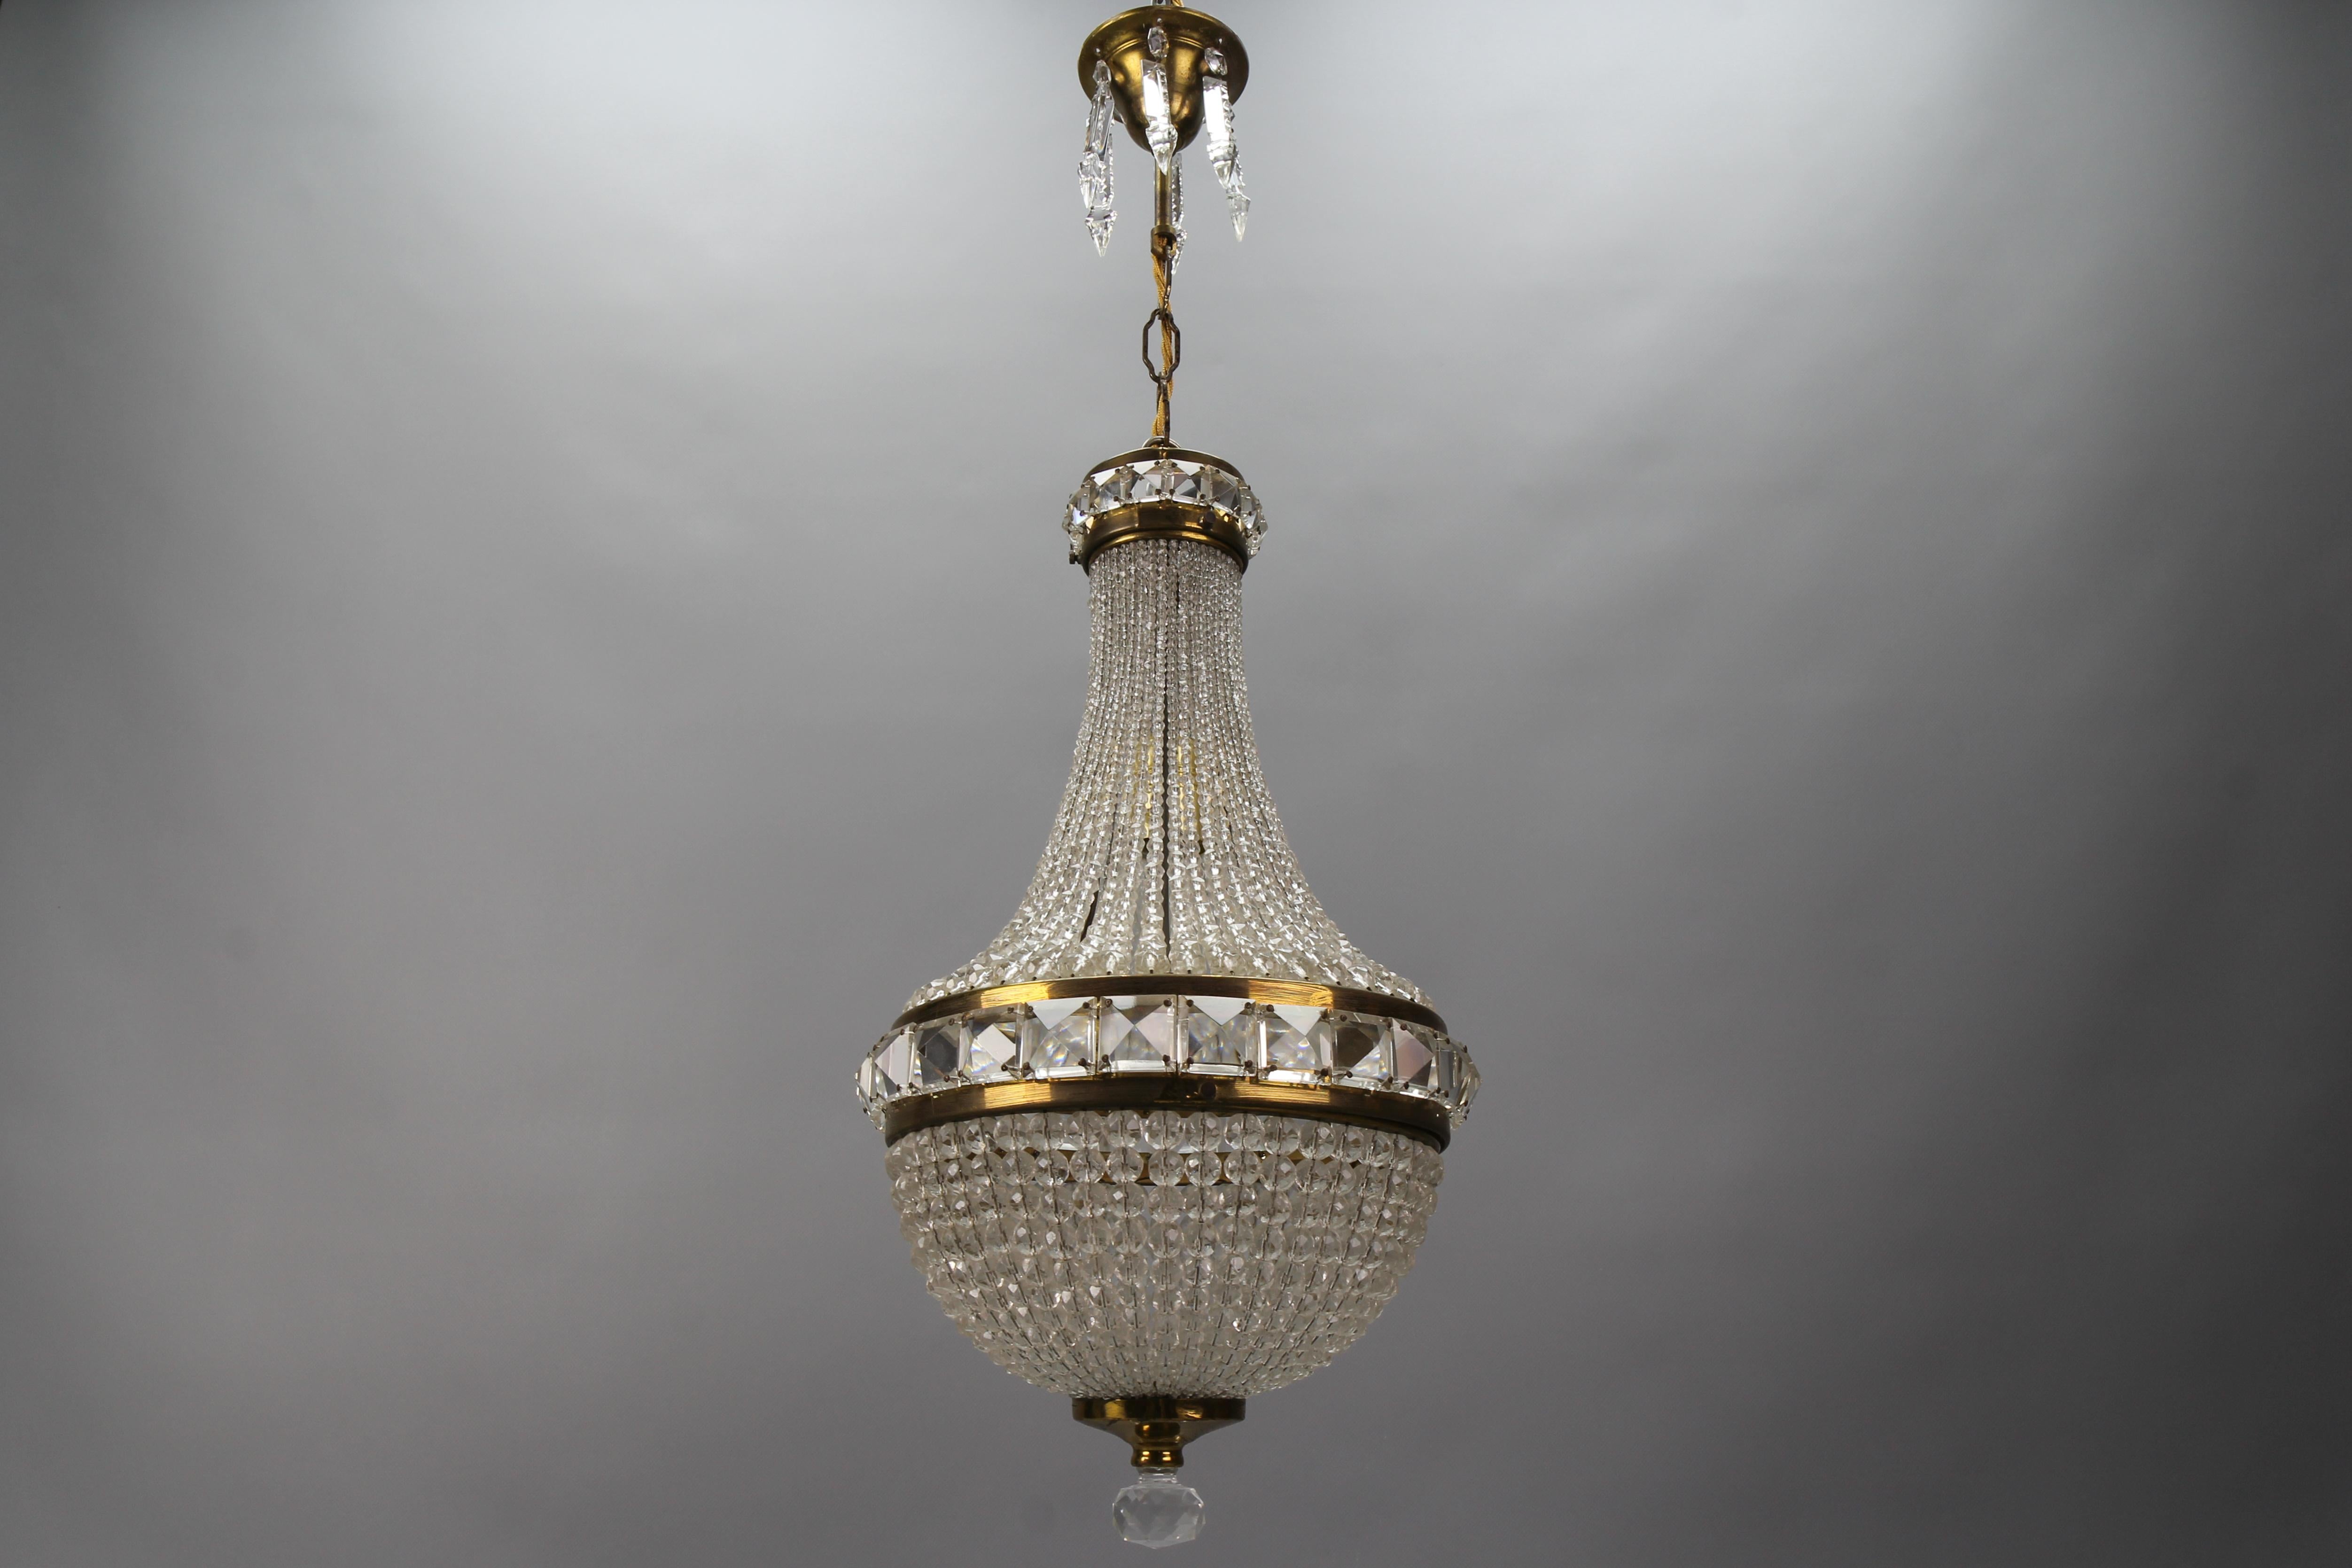 Czech Crystal Beaded Empire Style Dome Chandelier In Good Condition For Sale In Barntrup, DE